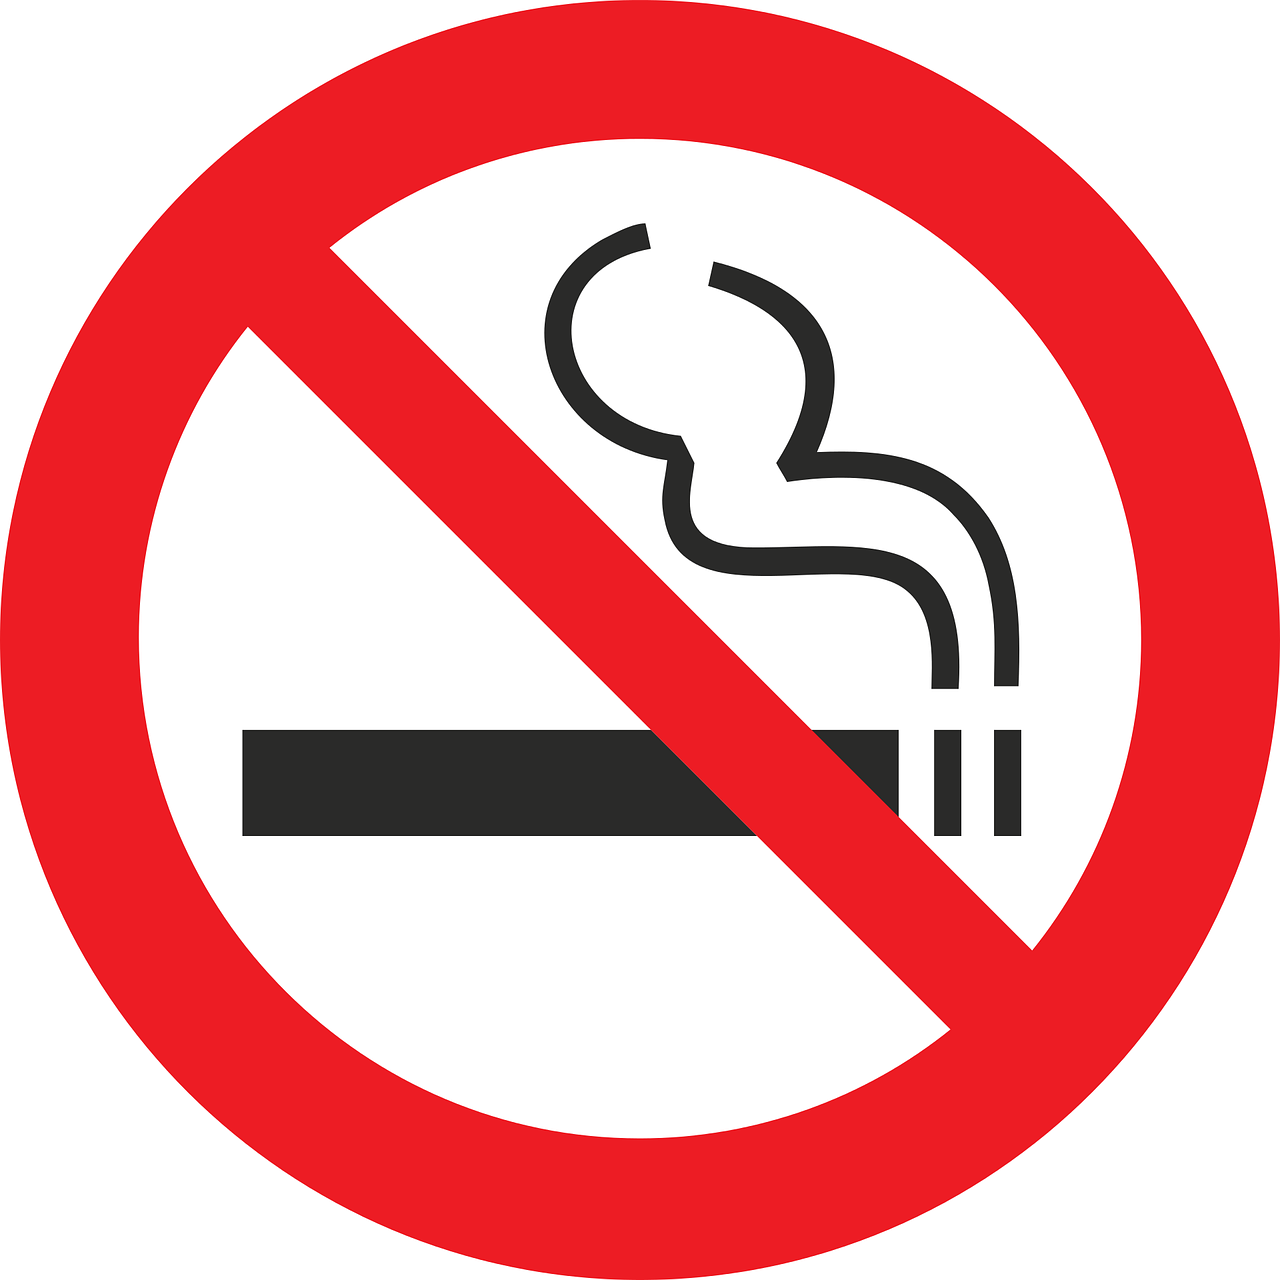 a no smoking sign on a white background, shutterstock, n4, round, cigarette advertising, no red colour